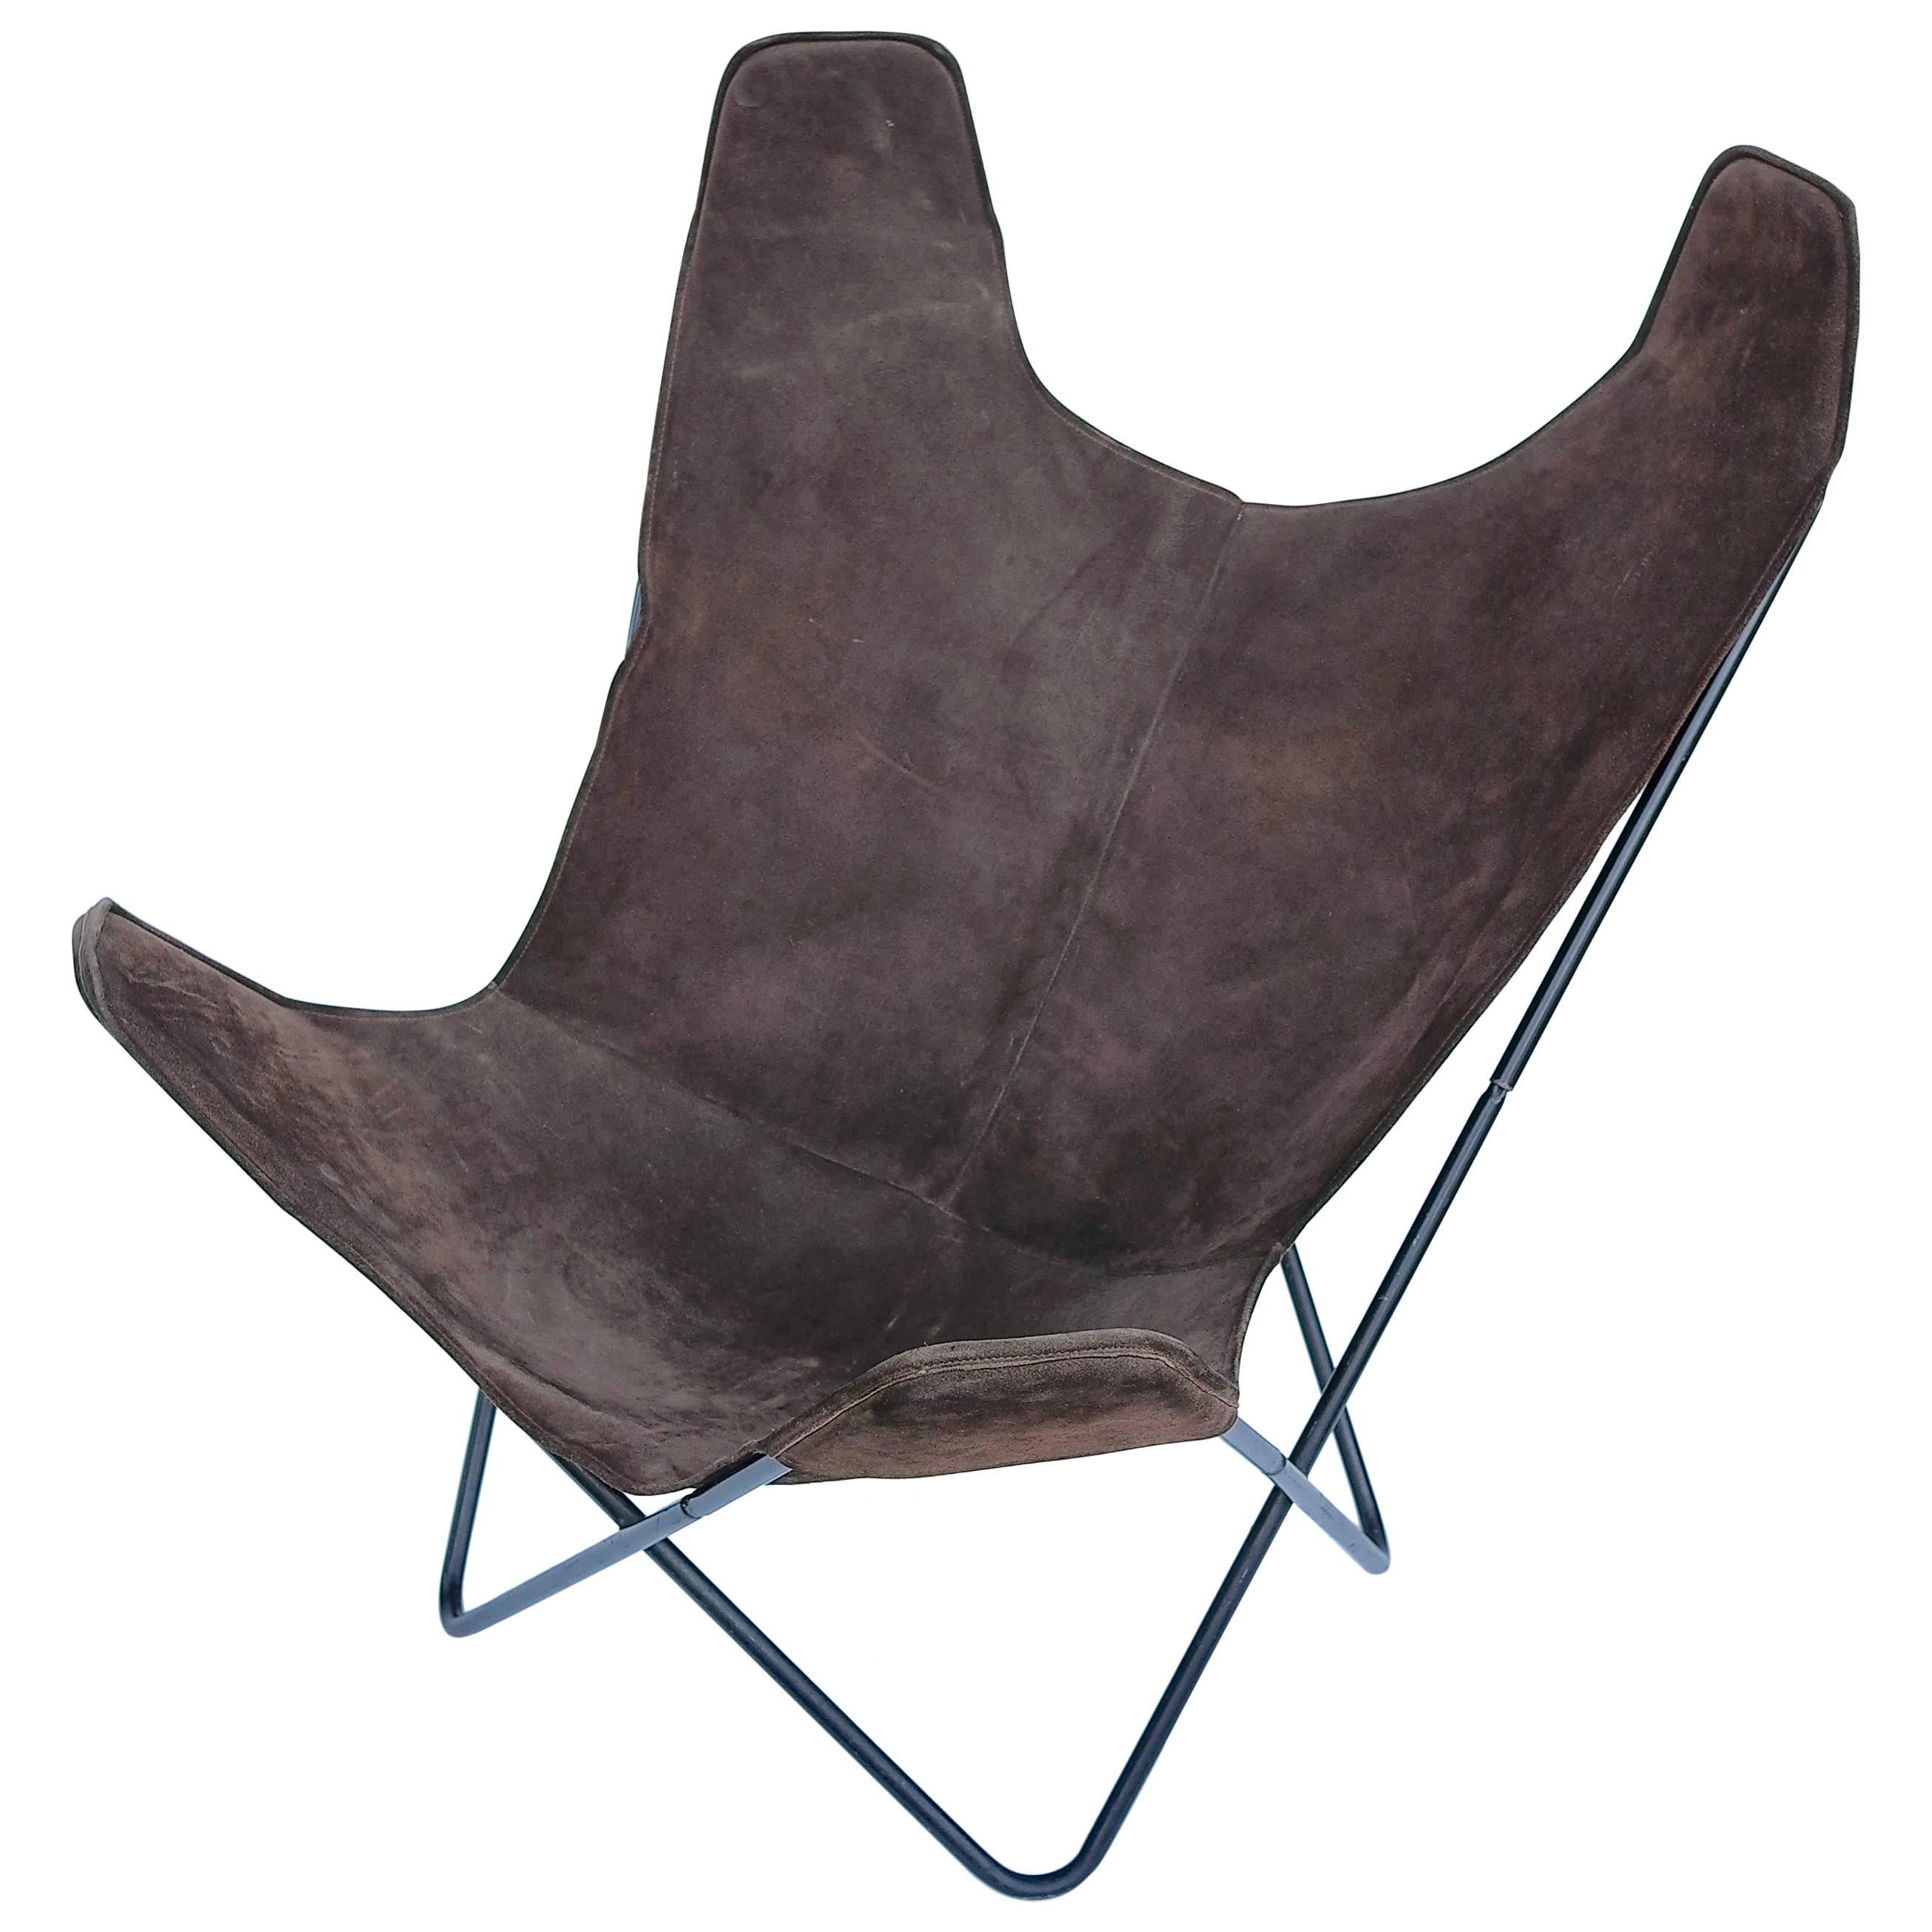 Knoll Butterfly Chair by Jorge Ferrari-Hardoy in Suede Leather